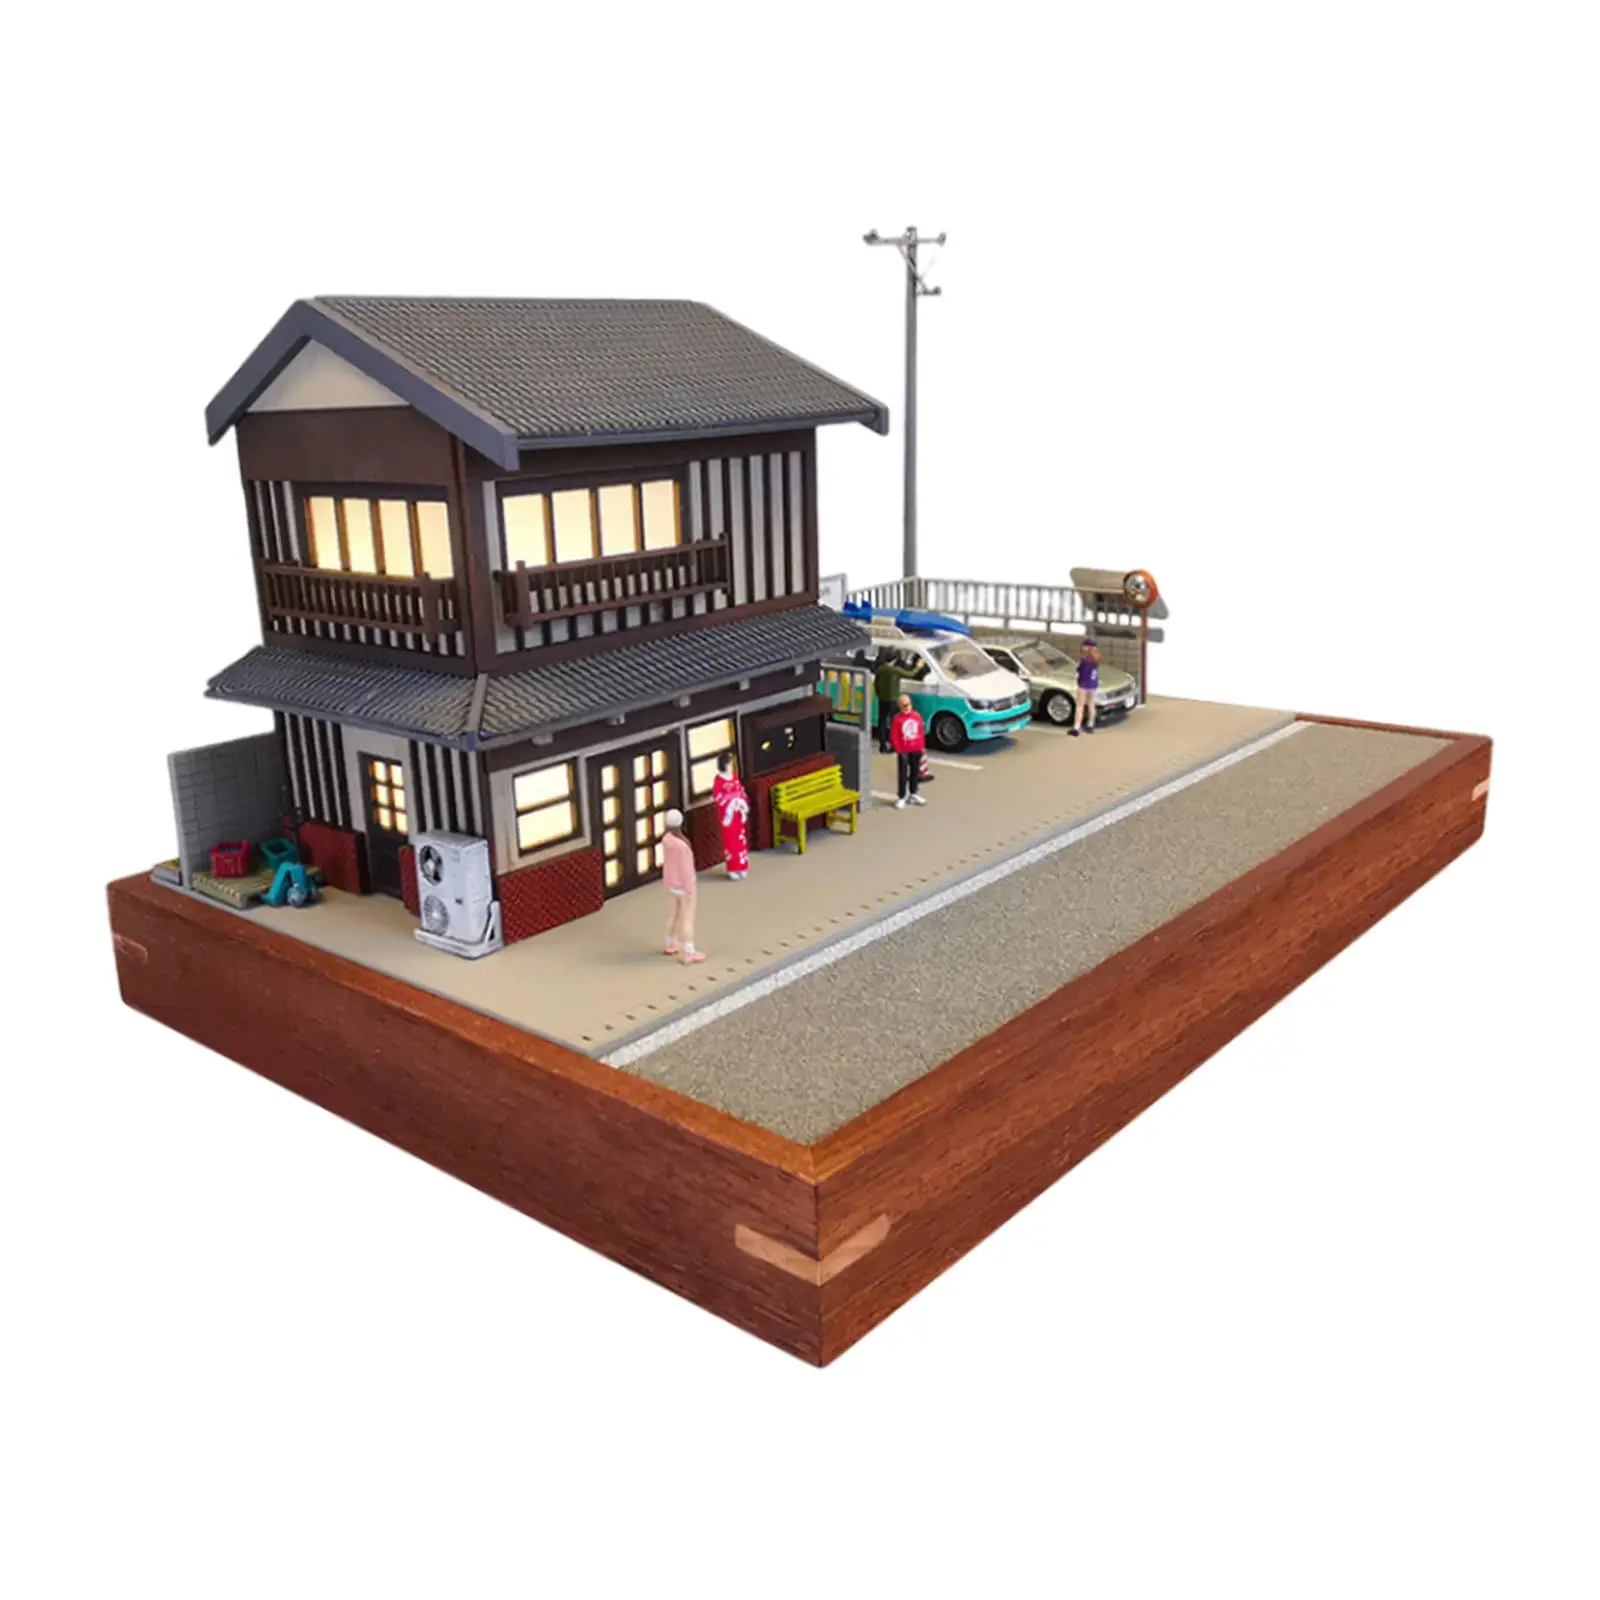 1/64 Model House for DIY Projects Accessory Diorama Layout Sand Table Decor